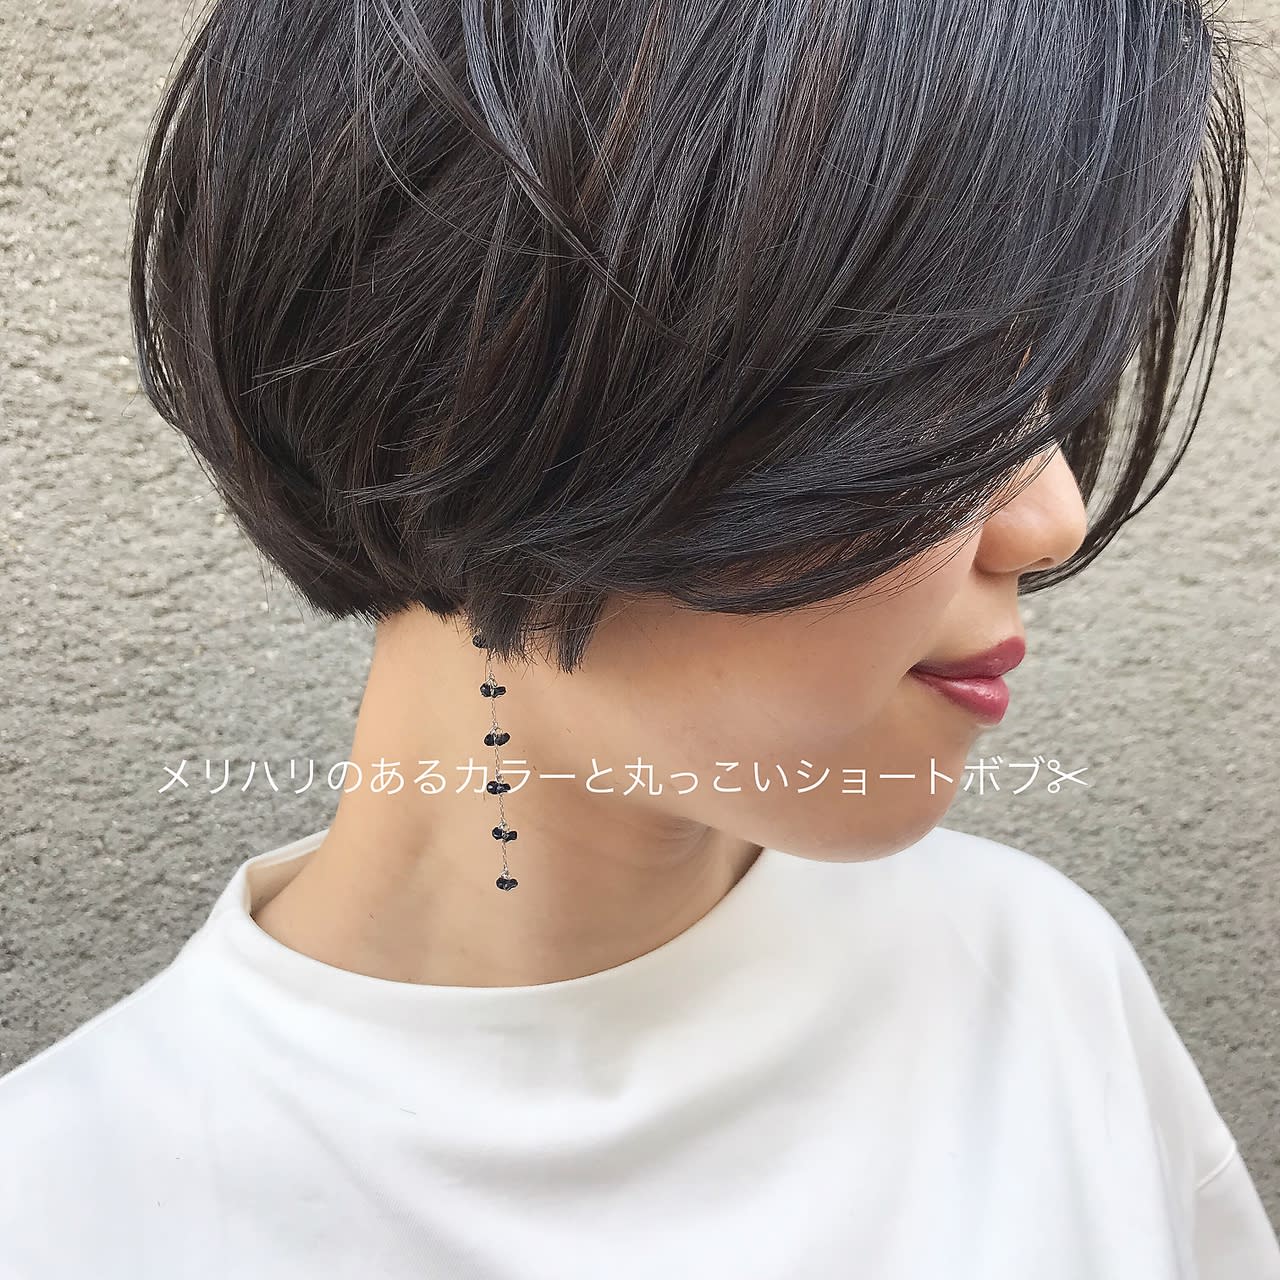 Link hair spaceのアイキャッチ画像